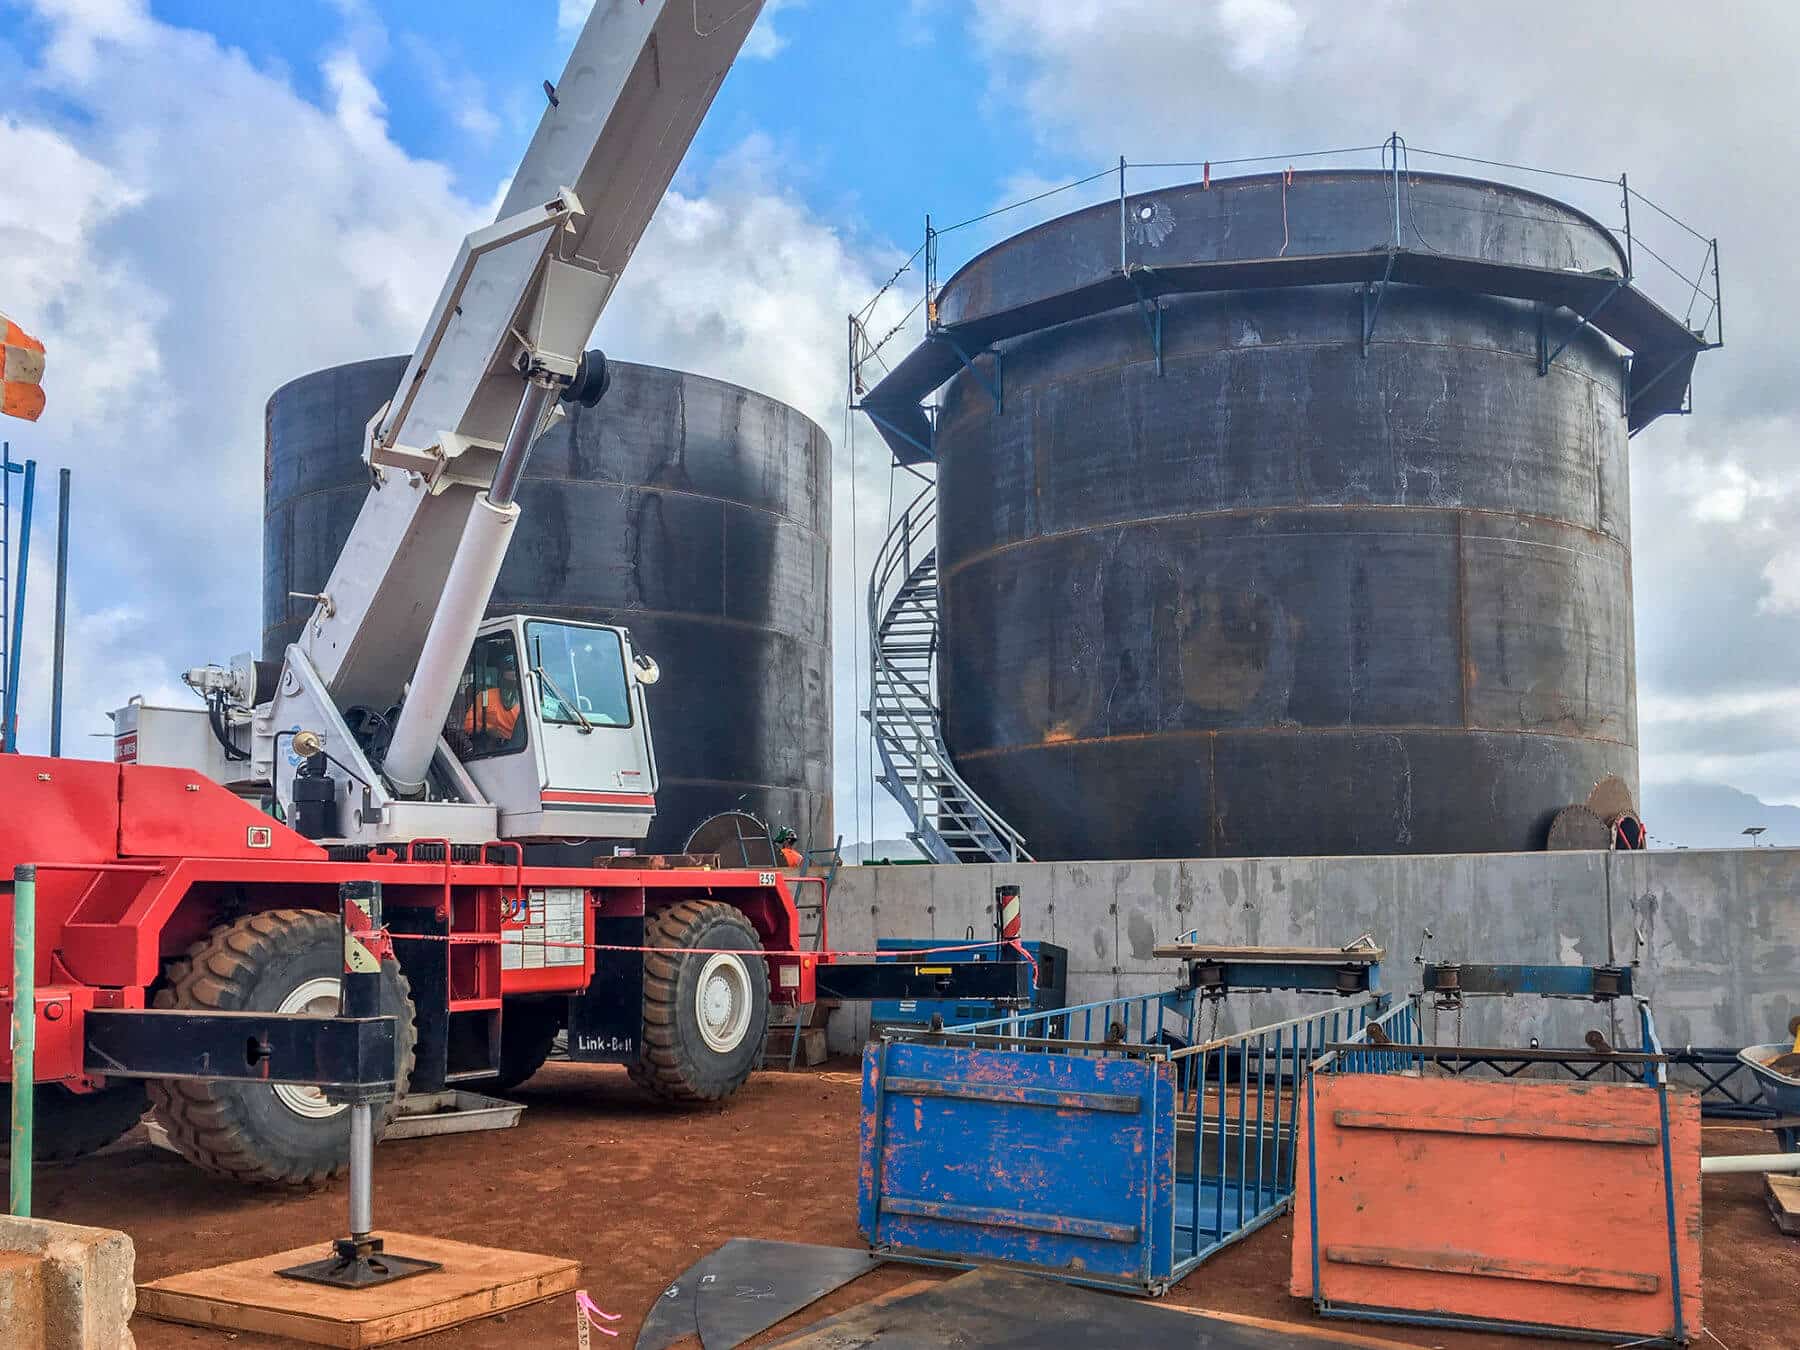 Bodell Construction is busy at the Fuel Farm Facility project at Lihue Airport.